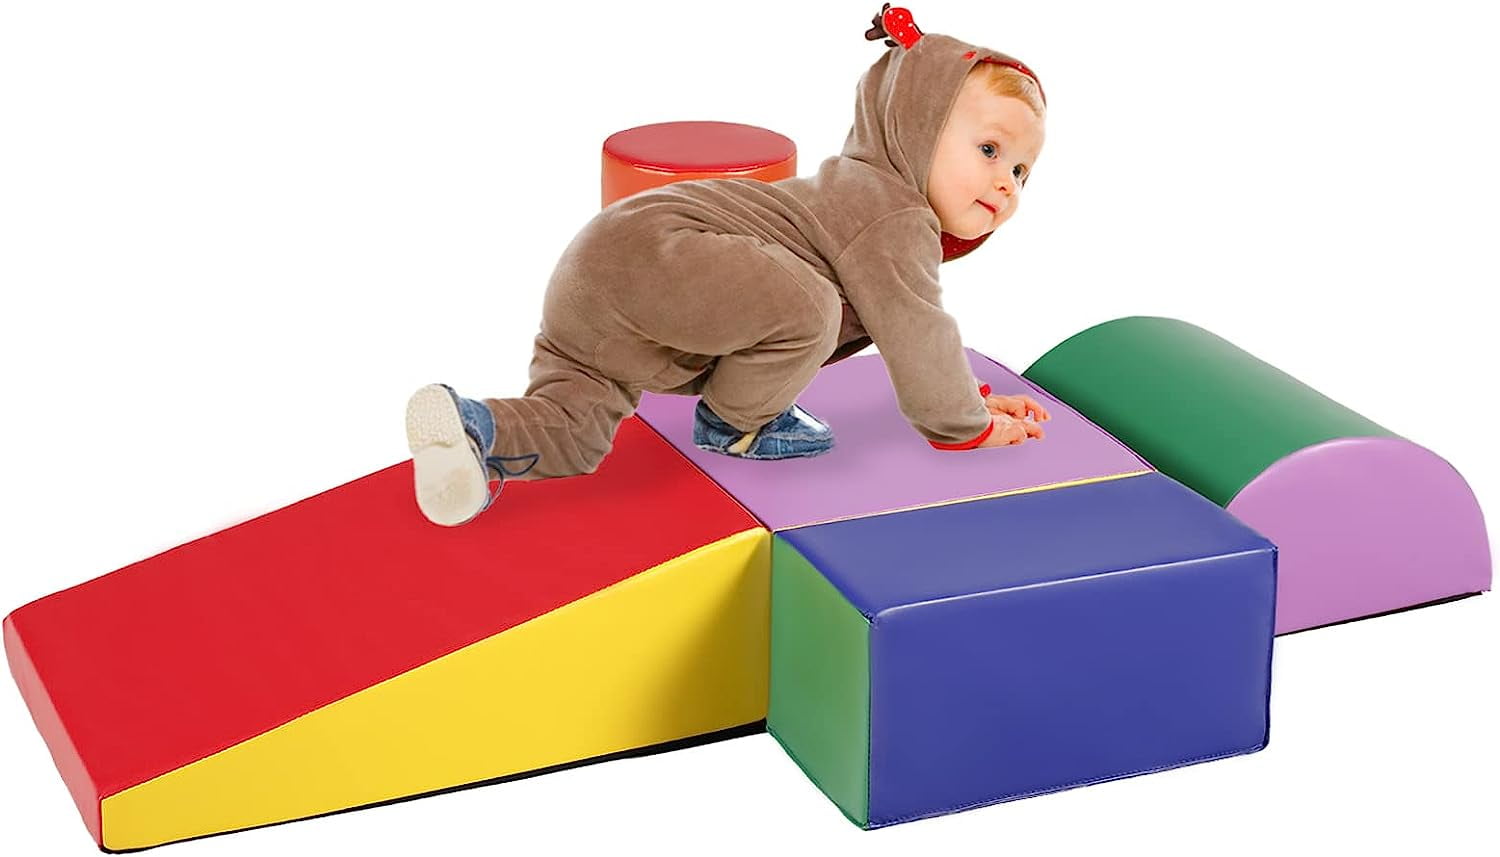 Ikkle 9 in 1 Foam Block Set for Kids Toddlers Crawling and Climbing Toy